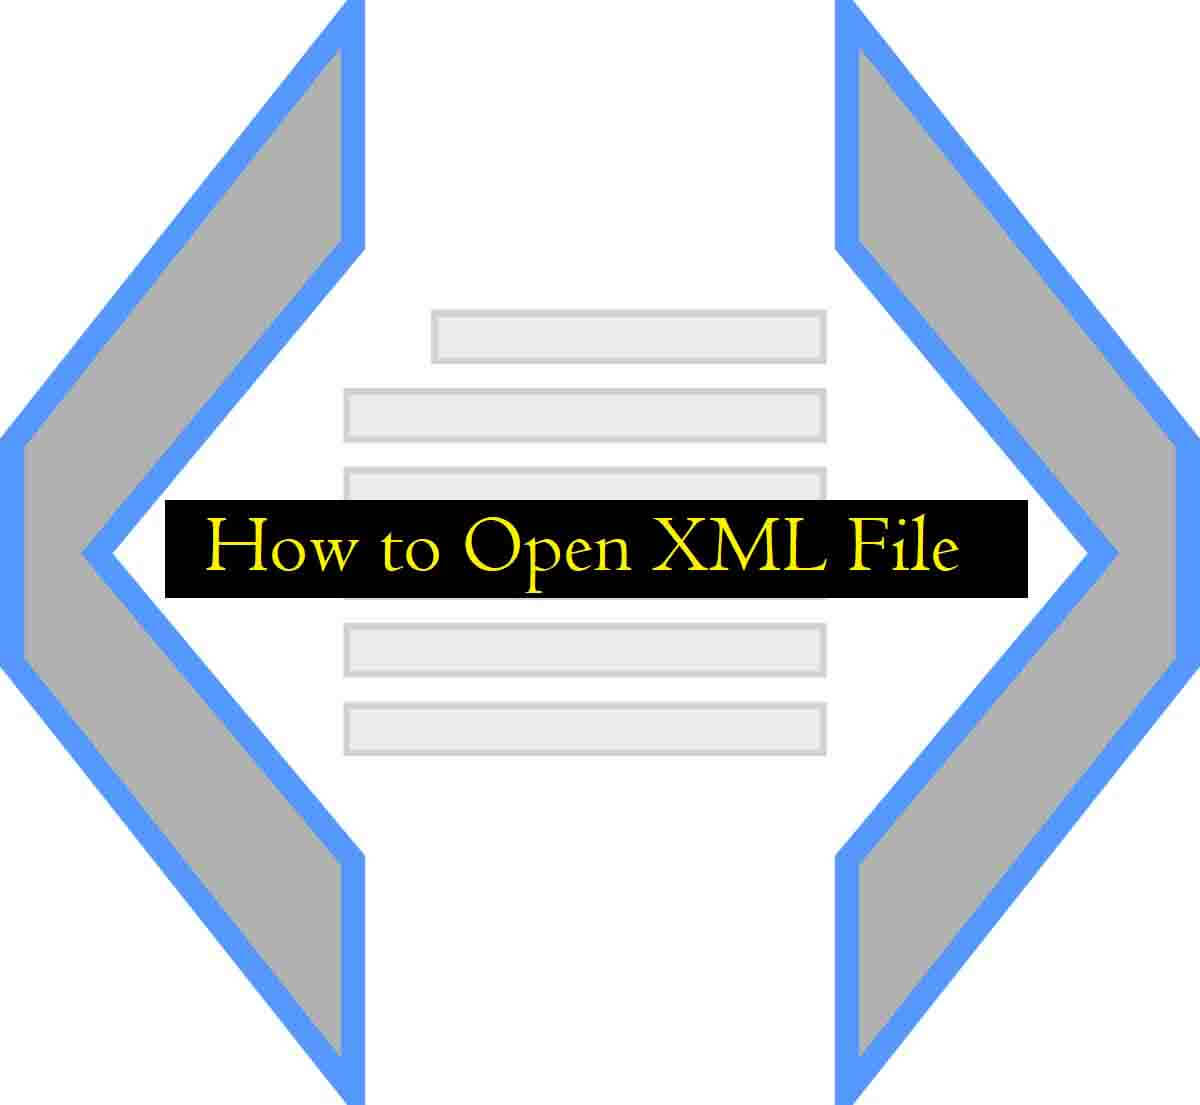 How to Open XML File